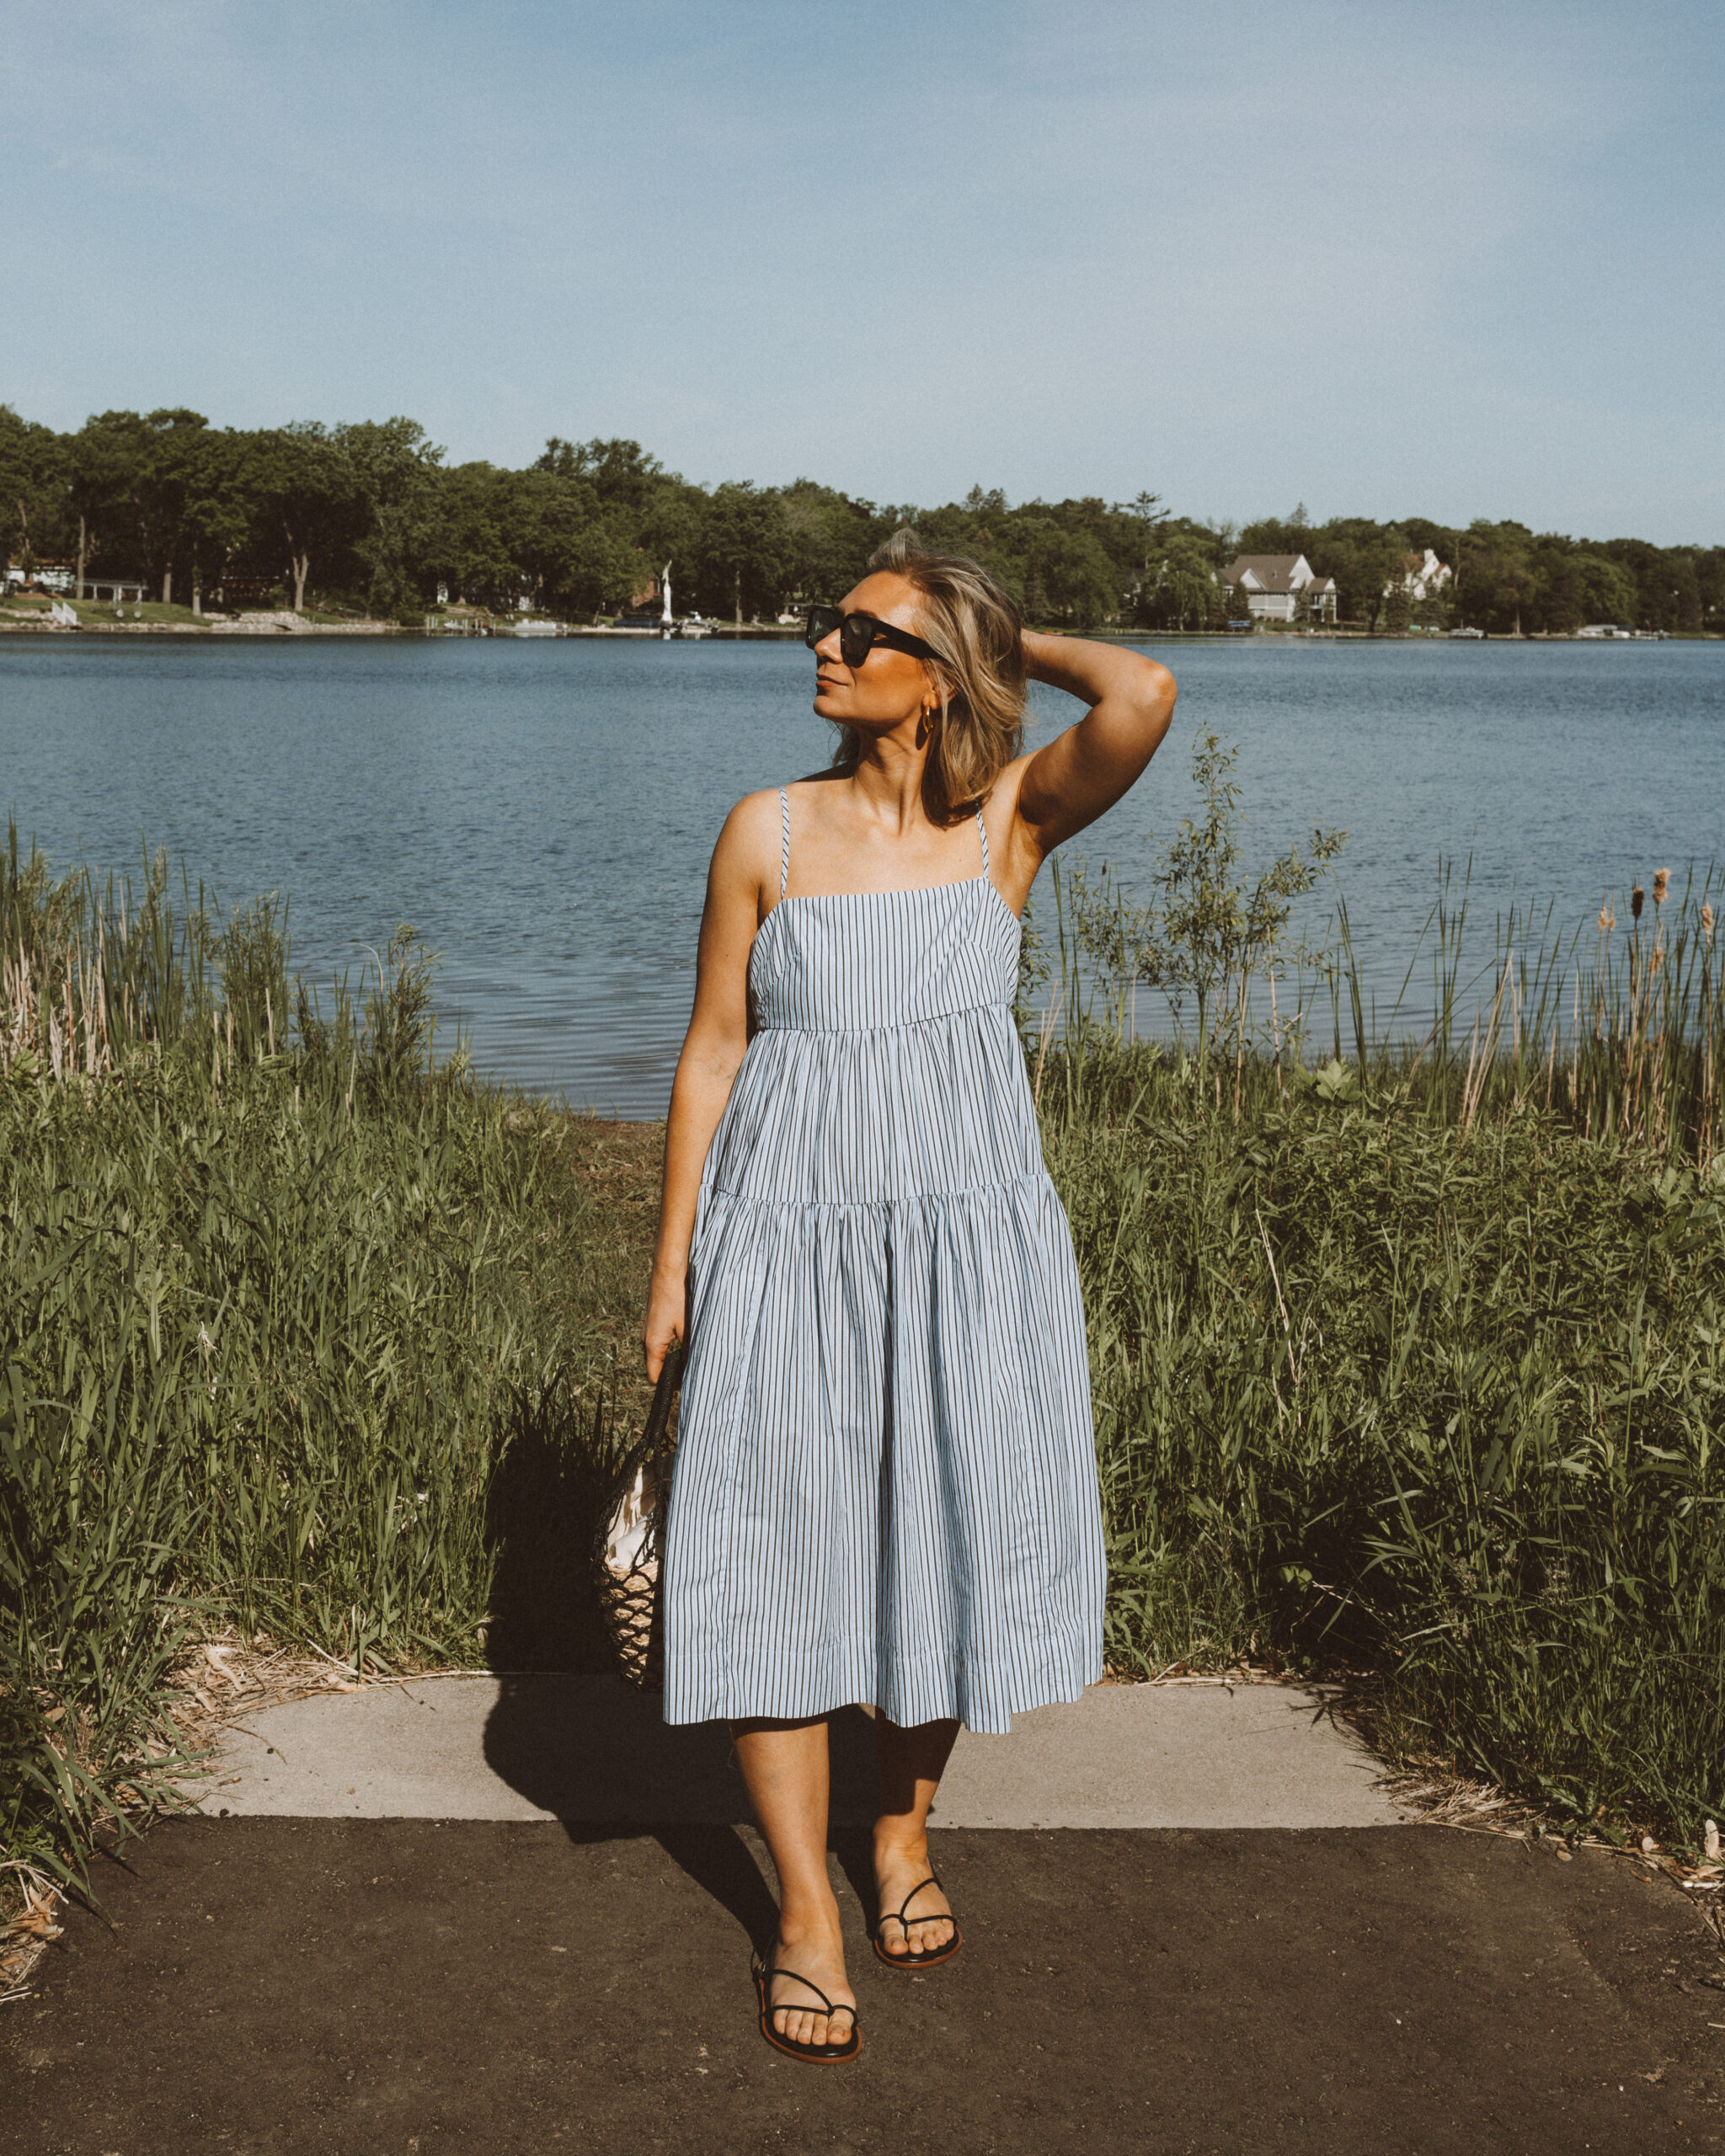 Karin Emily wears a vacation ready outfit: blue and white striped sundress from J. Crew